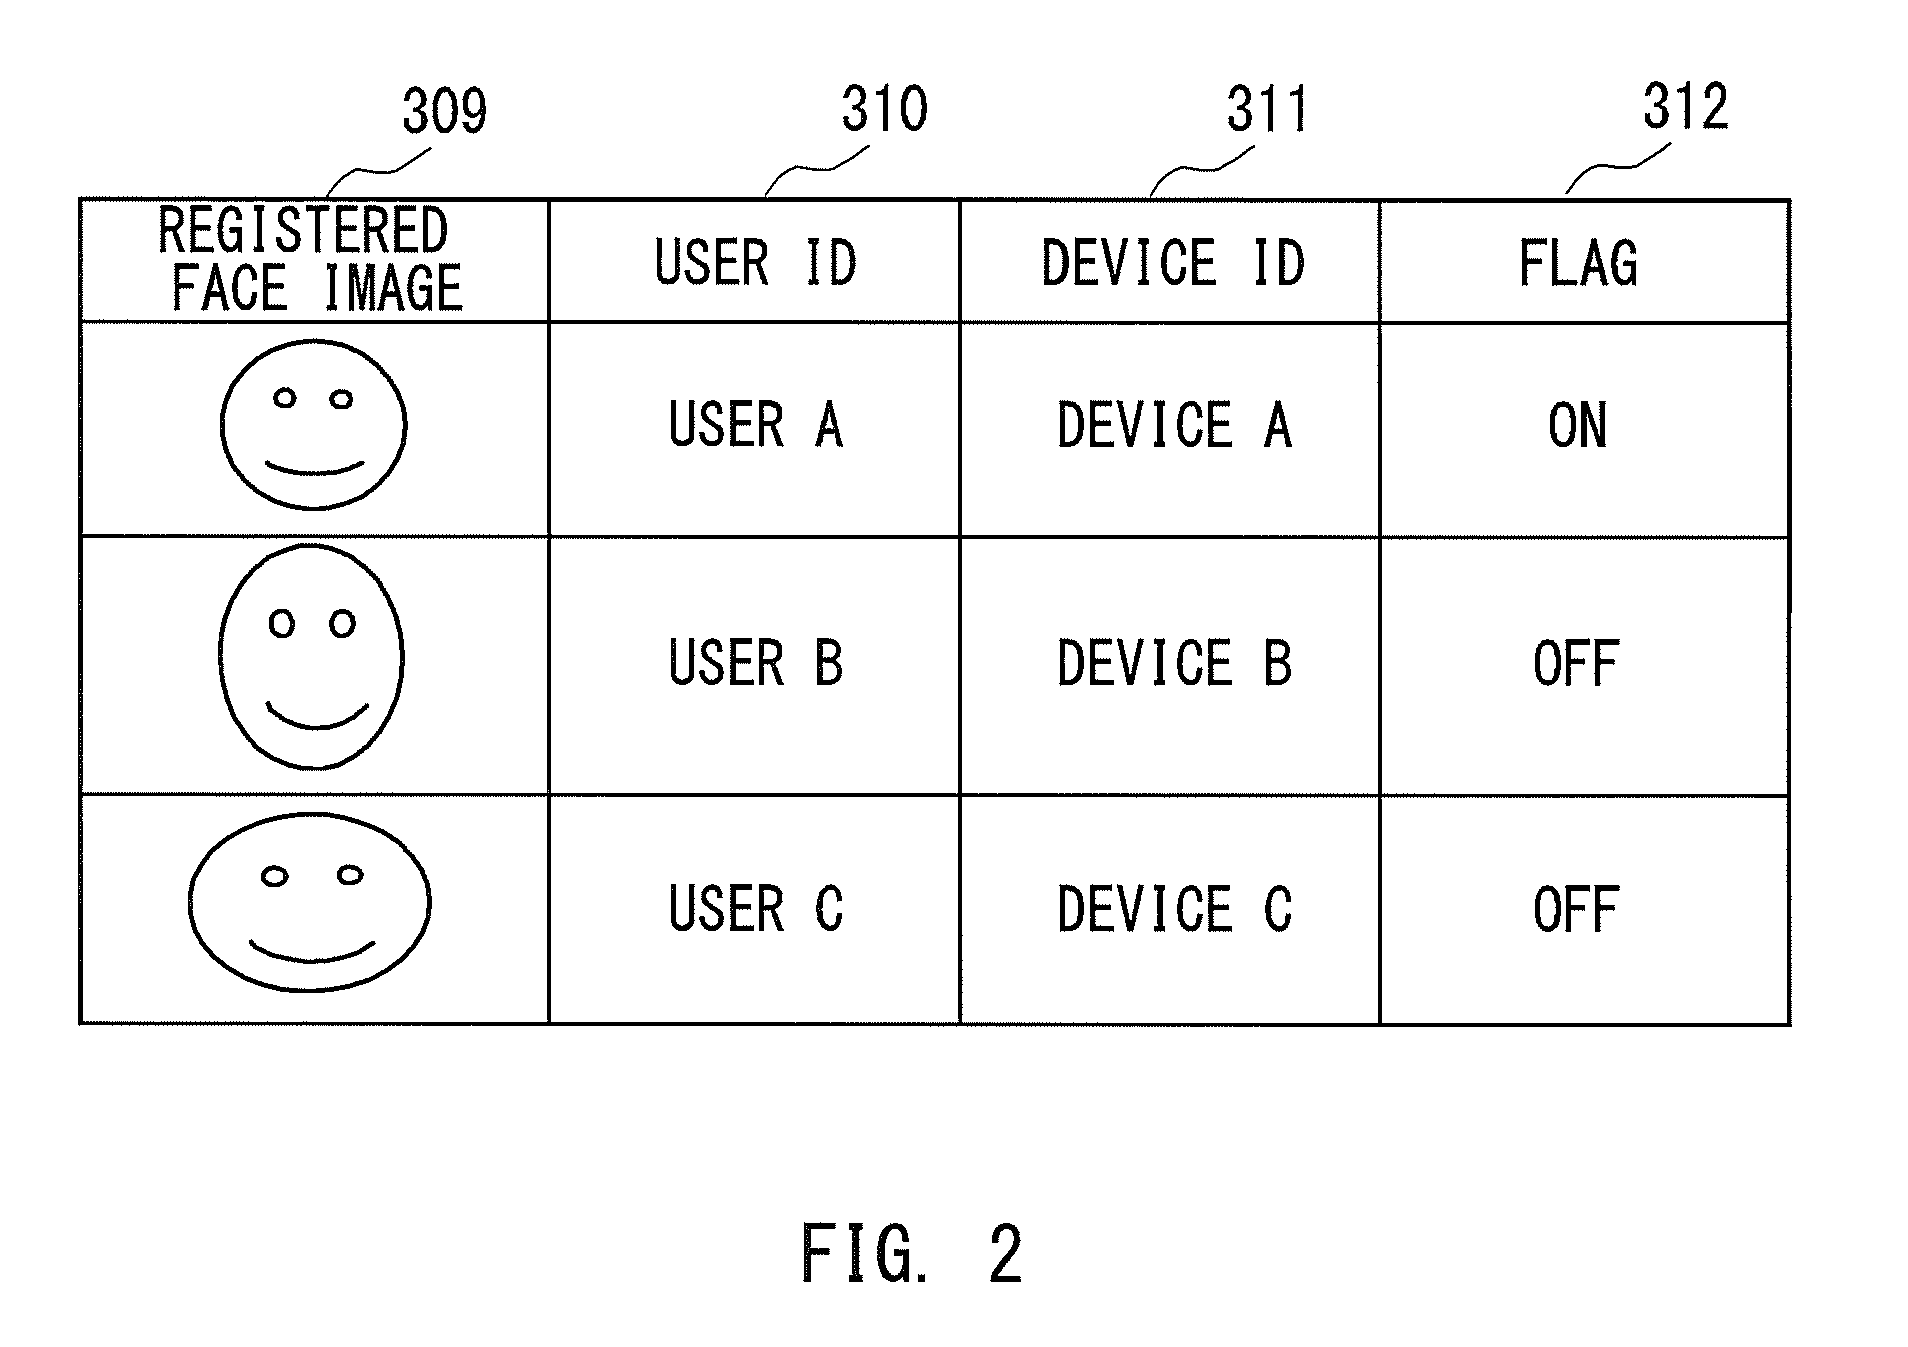 Information processing device, information processing method and storage medium for identifying communication counterpart based on image including person